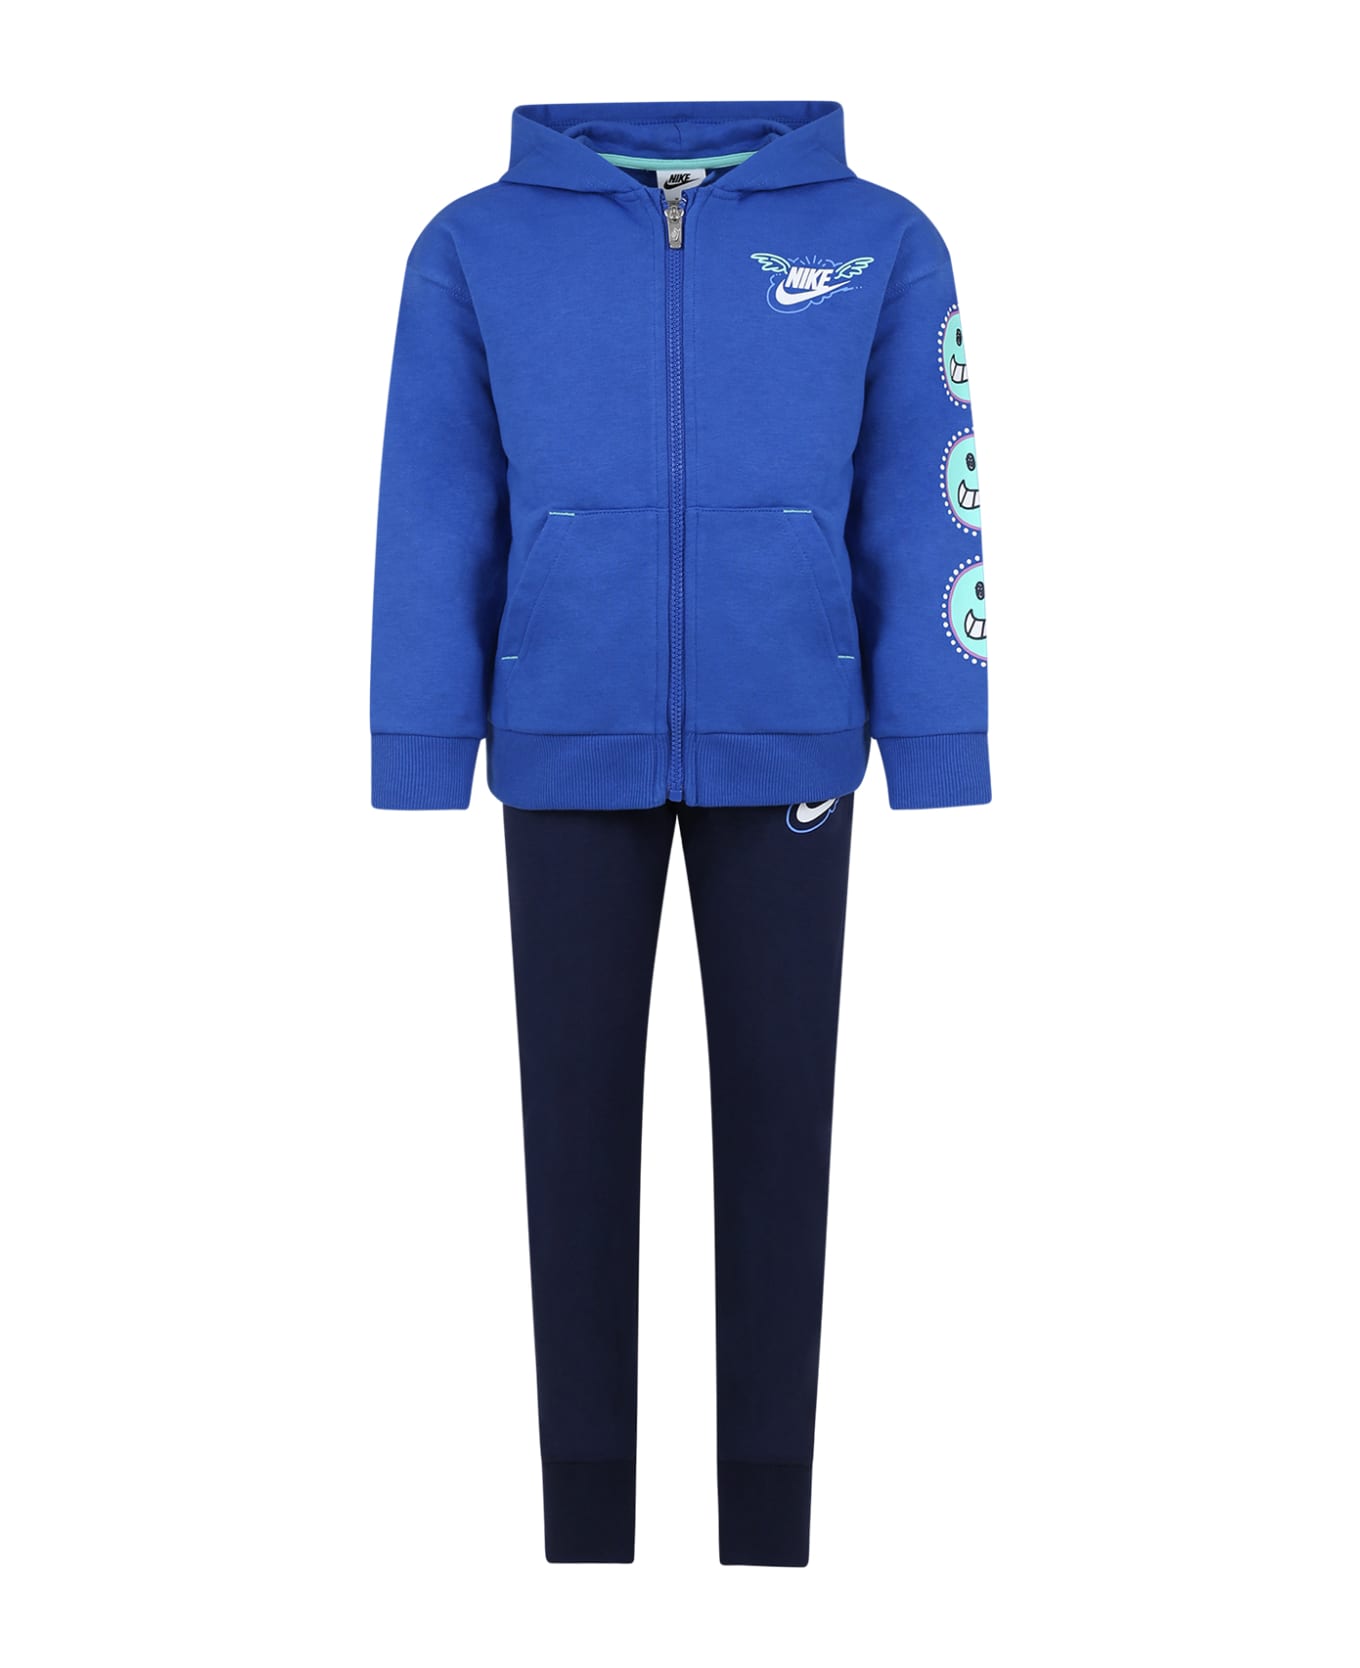 Nike Blue Tracksuit For Boy With Logo - Blue